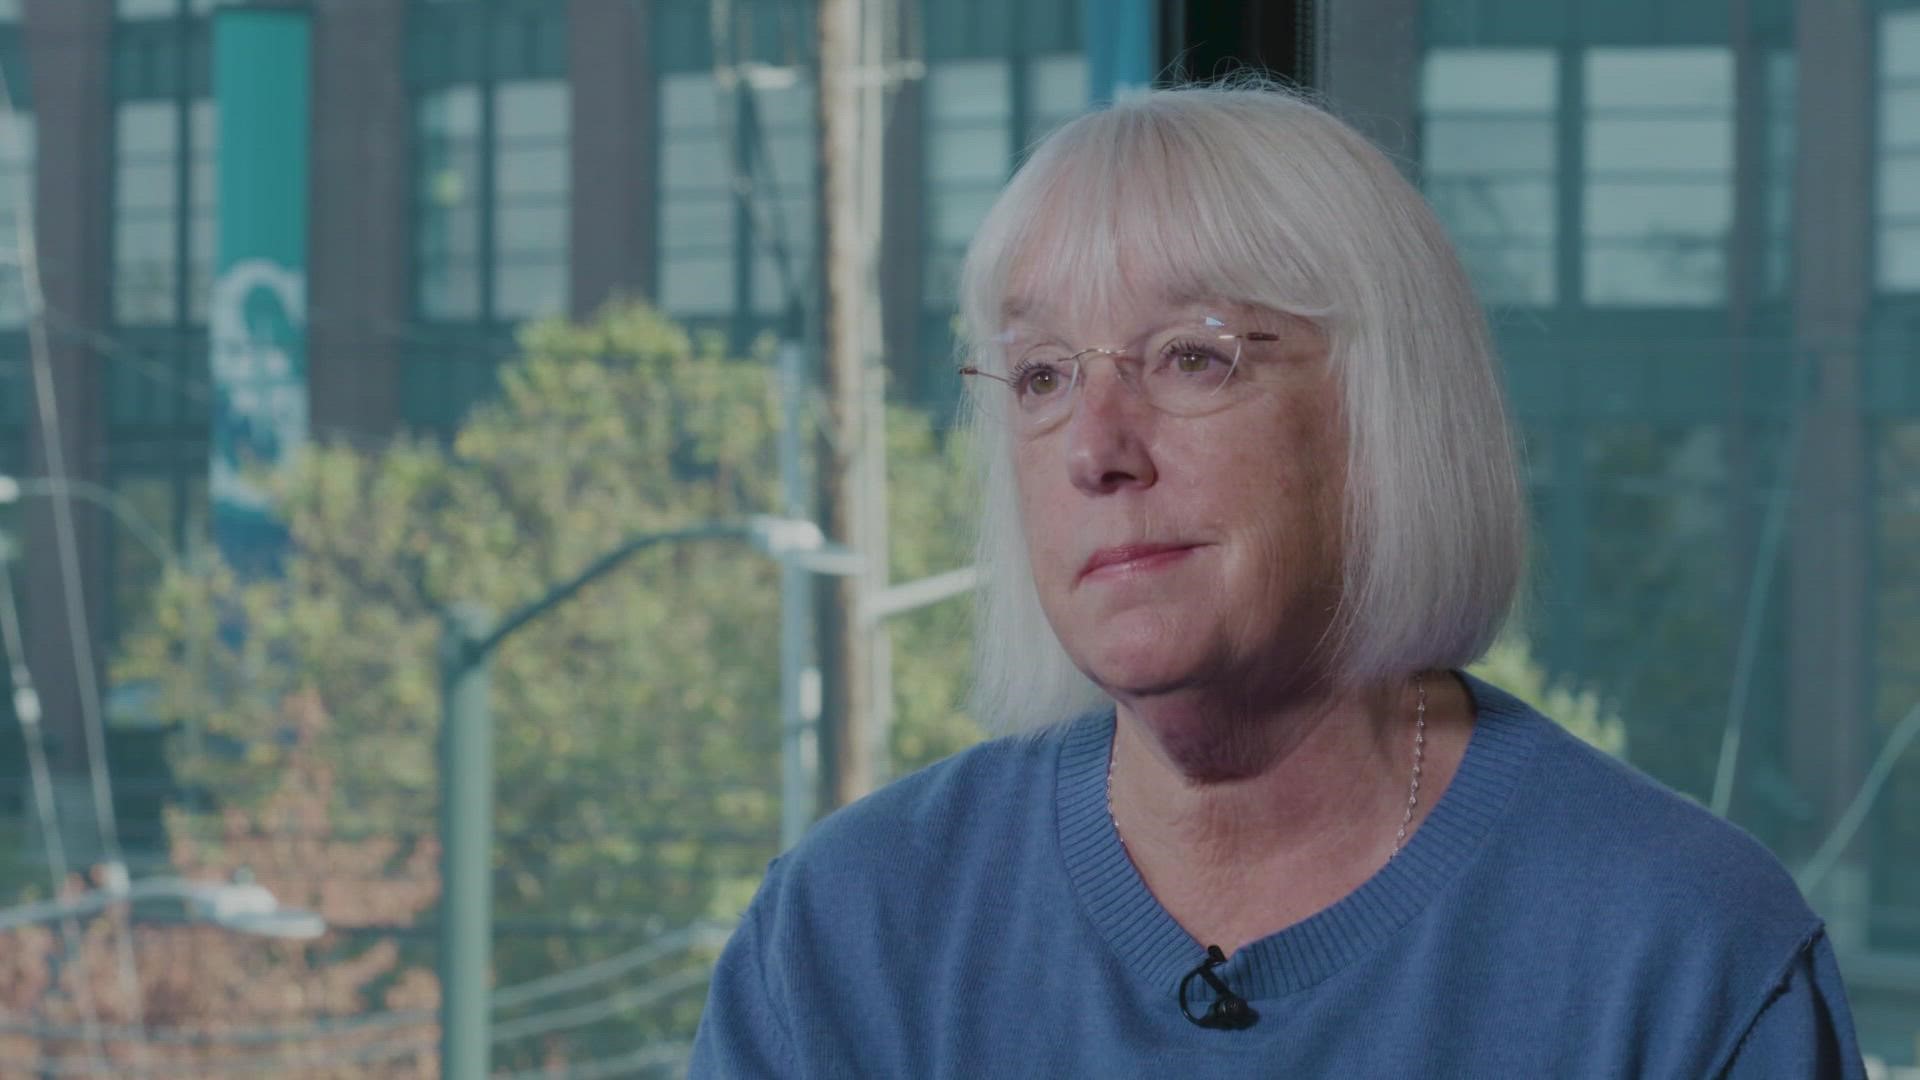 Patty Murray sits down with KING 5's Greg Copeland ahead of the Nov. 8 general election